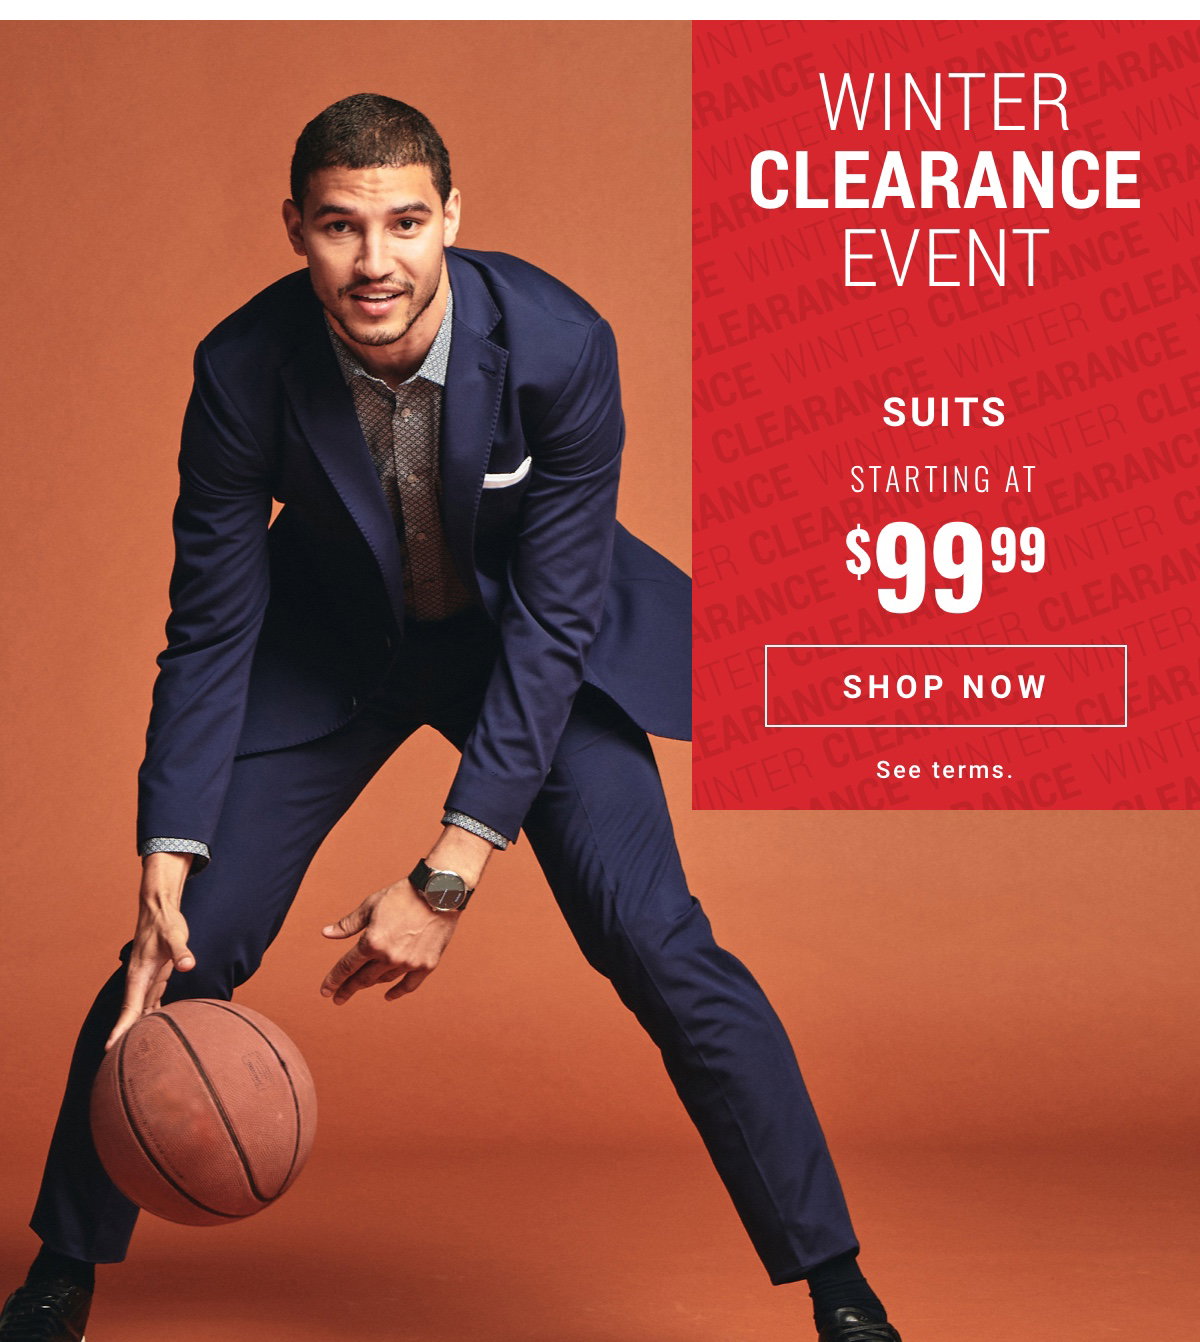 Save Now On Clearance